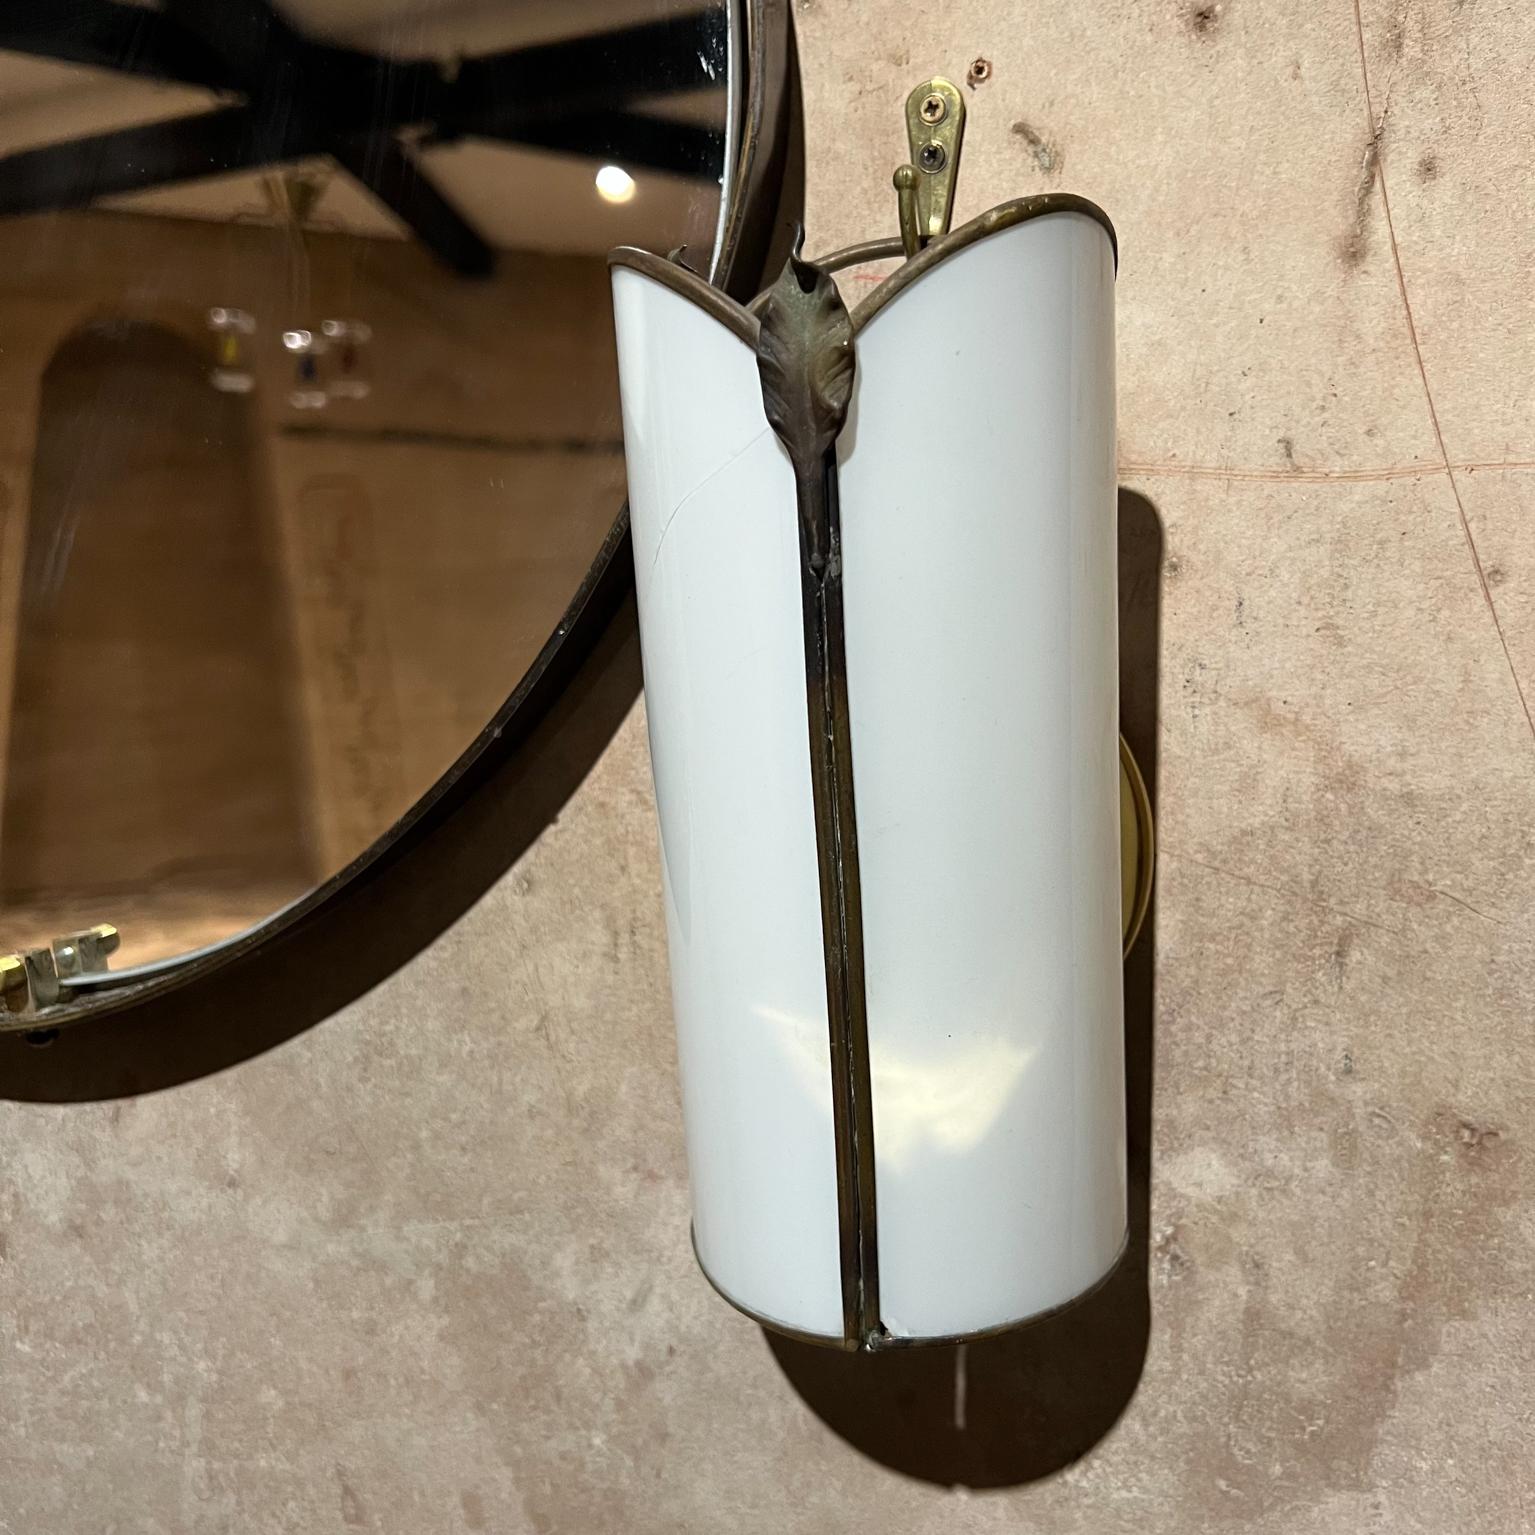 Hotel Del Coronado vintage white glass crown sconce Jackets a pair
Listing price is per pair. Total of 2 pairs. One pair has damage on glass, hairline crack and chips. Mirror is available in another listing.
8.5 tall x 4 w x 3 d
Preowned vintage